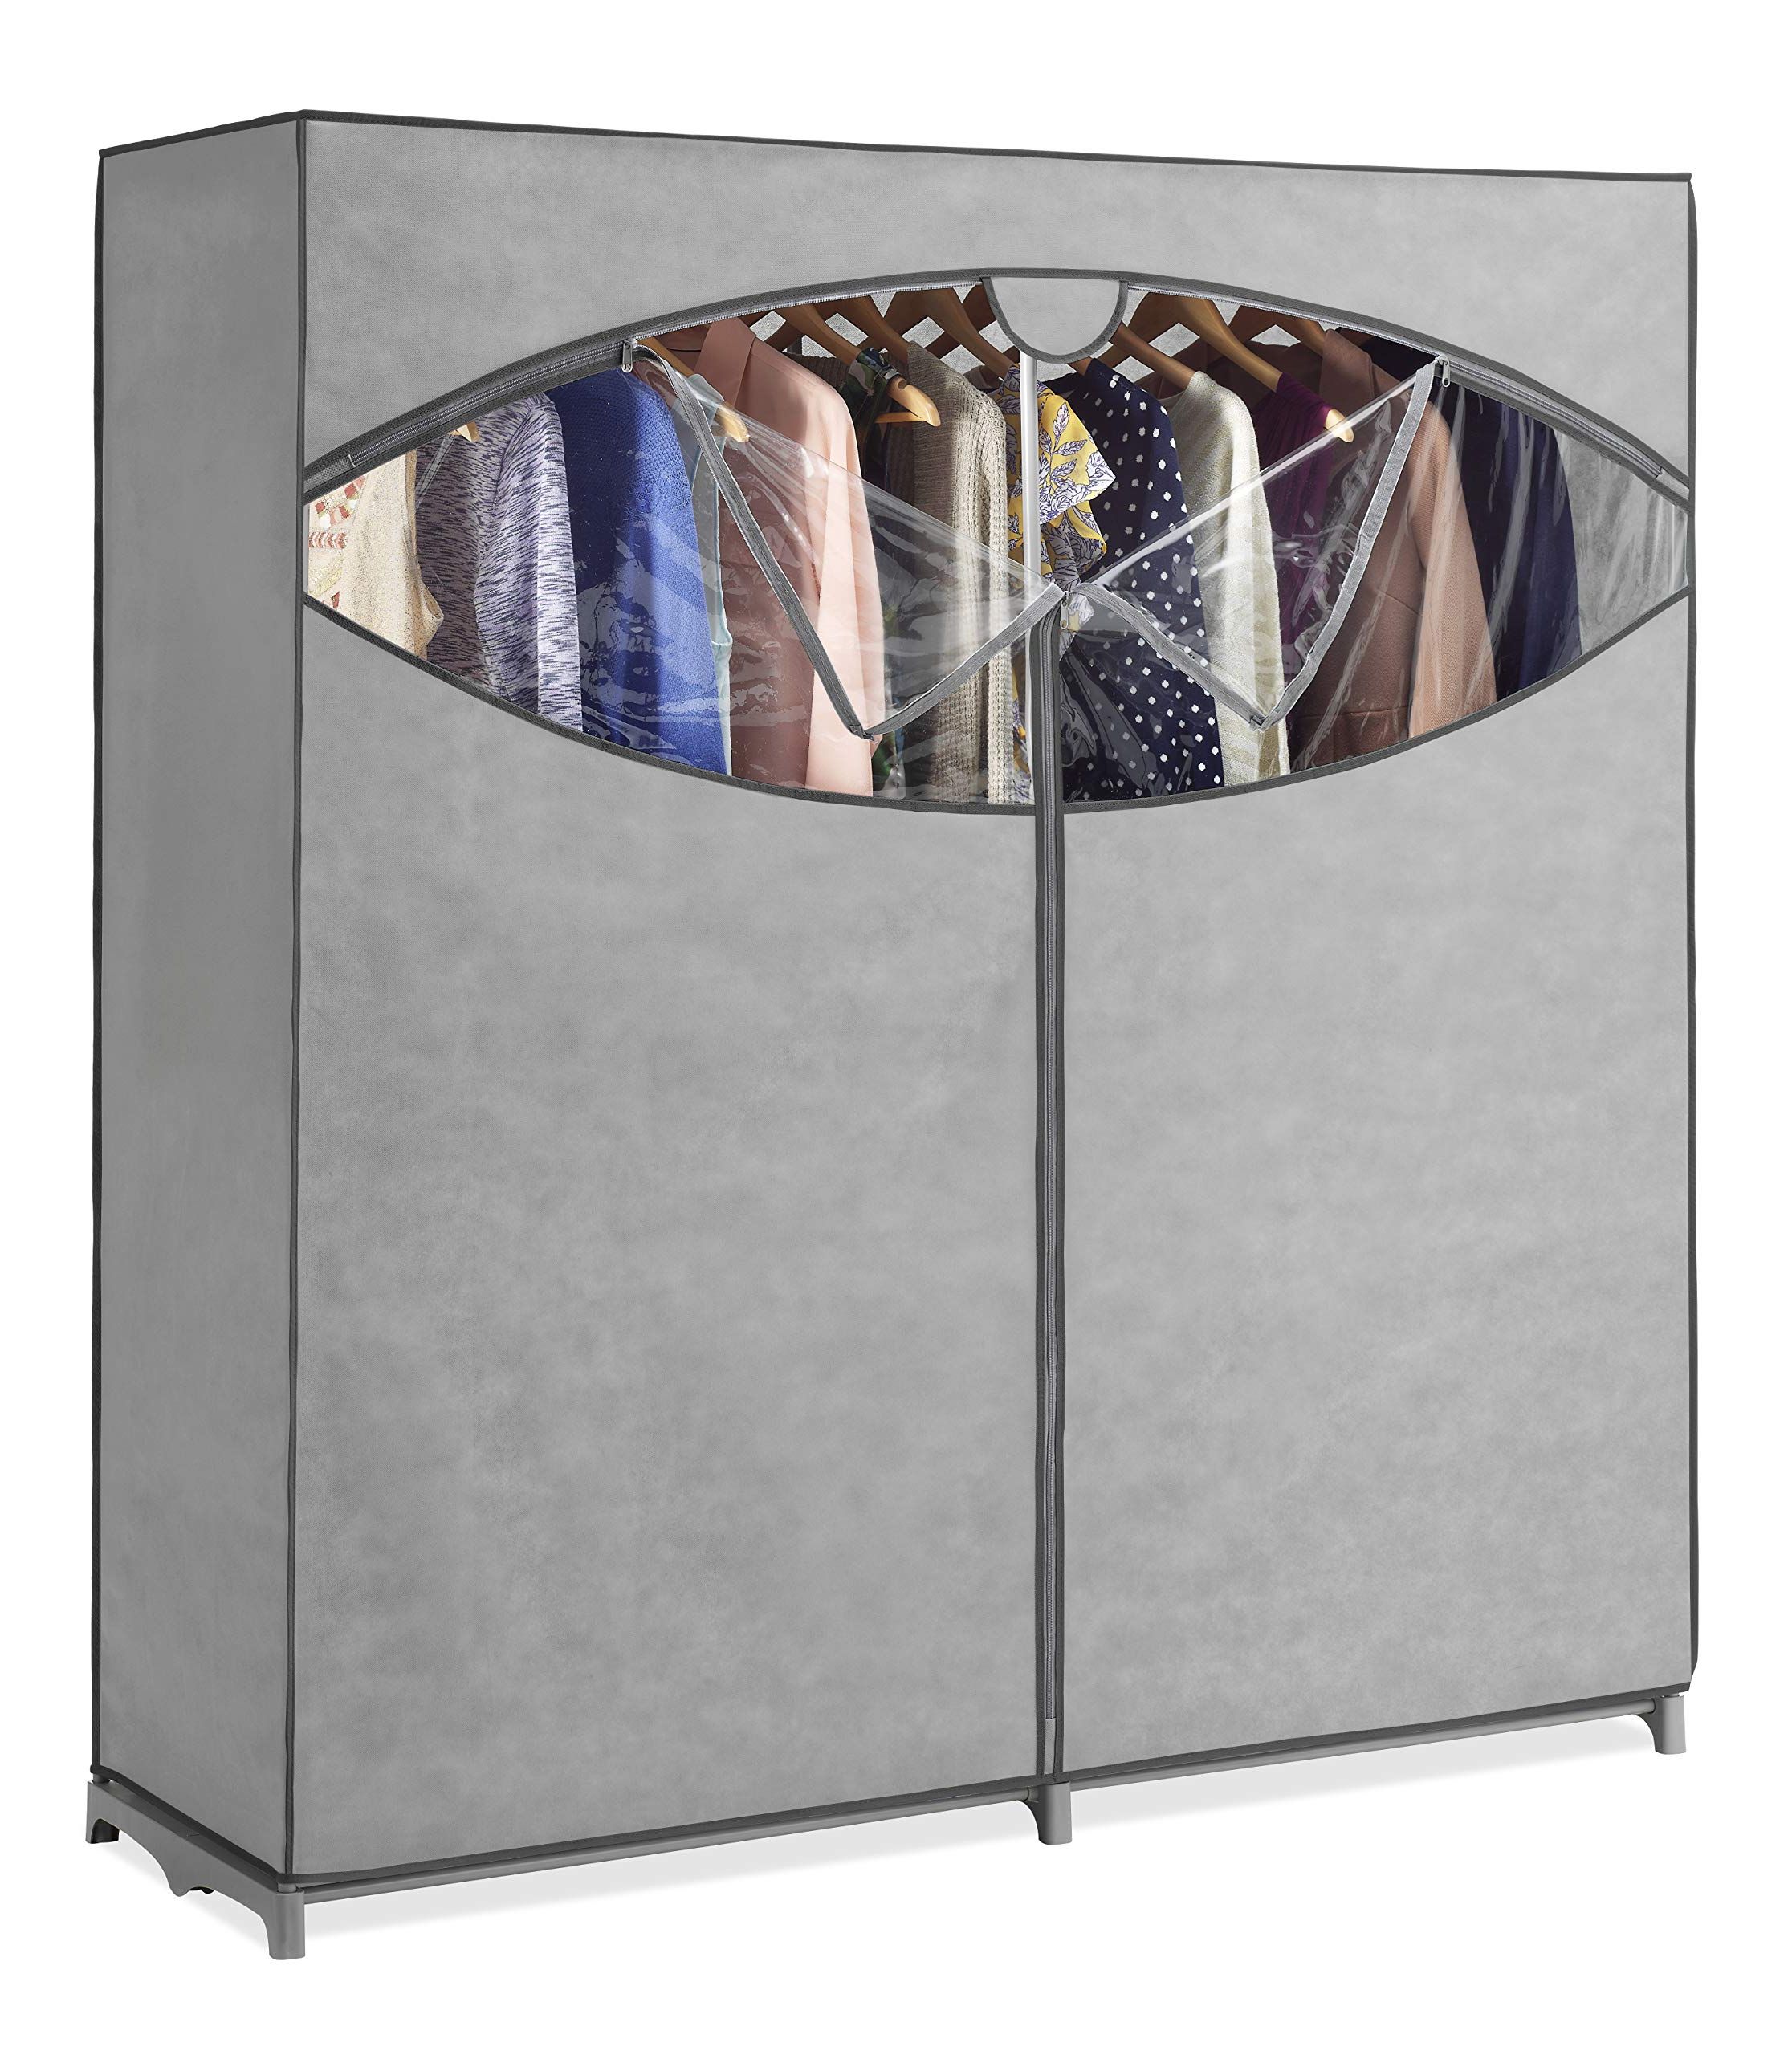 Fashionable Extra Wide Portable Wardrobes Inside Amazon: Whitmor Portable Wardrobe Clothes Storage Organizer Closet With  Hanging Rack – Extra Wide  Grey Color – No Tool Assembly – Strong & Durable  – 60inw X 19.5ind X 64in L – Not (Photo 5 of 10)